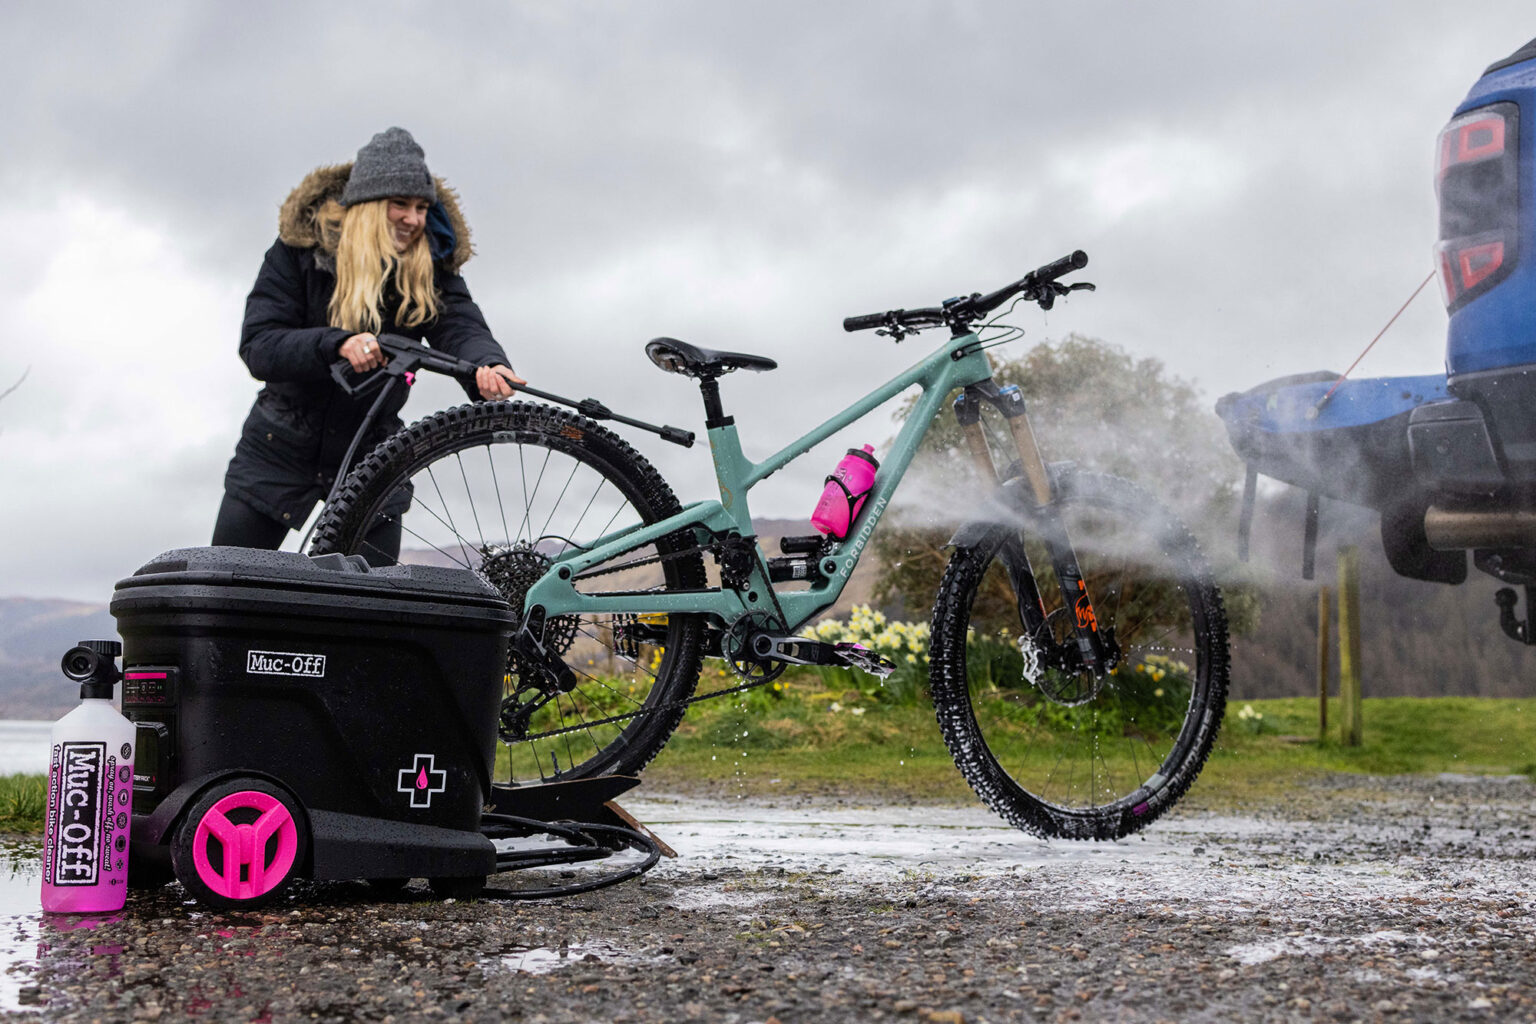 Muc-Off Mobile Bike Pressure Washer, portable rechargeable clean your bicycles anywhere machine, blast it clean before the drive home